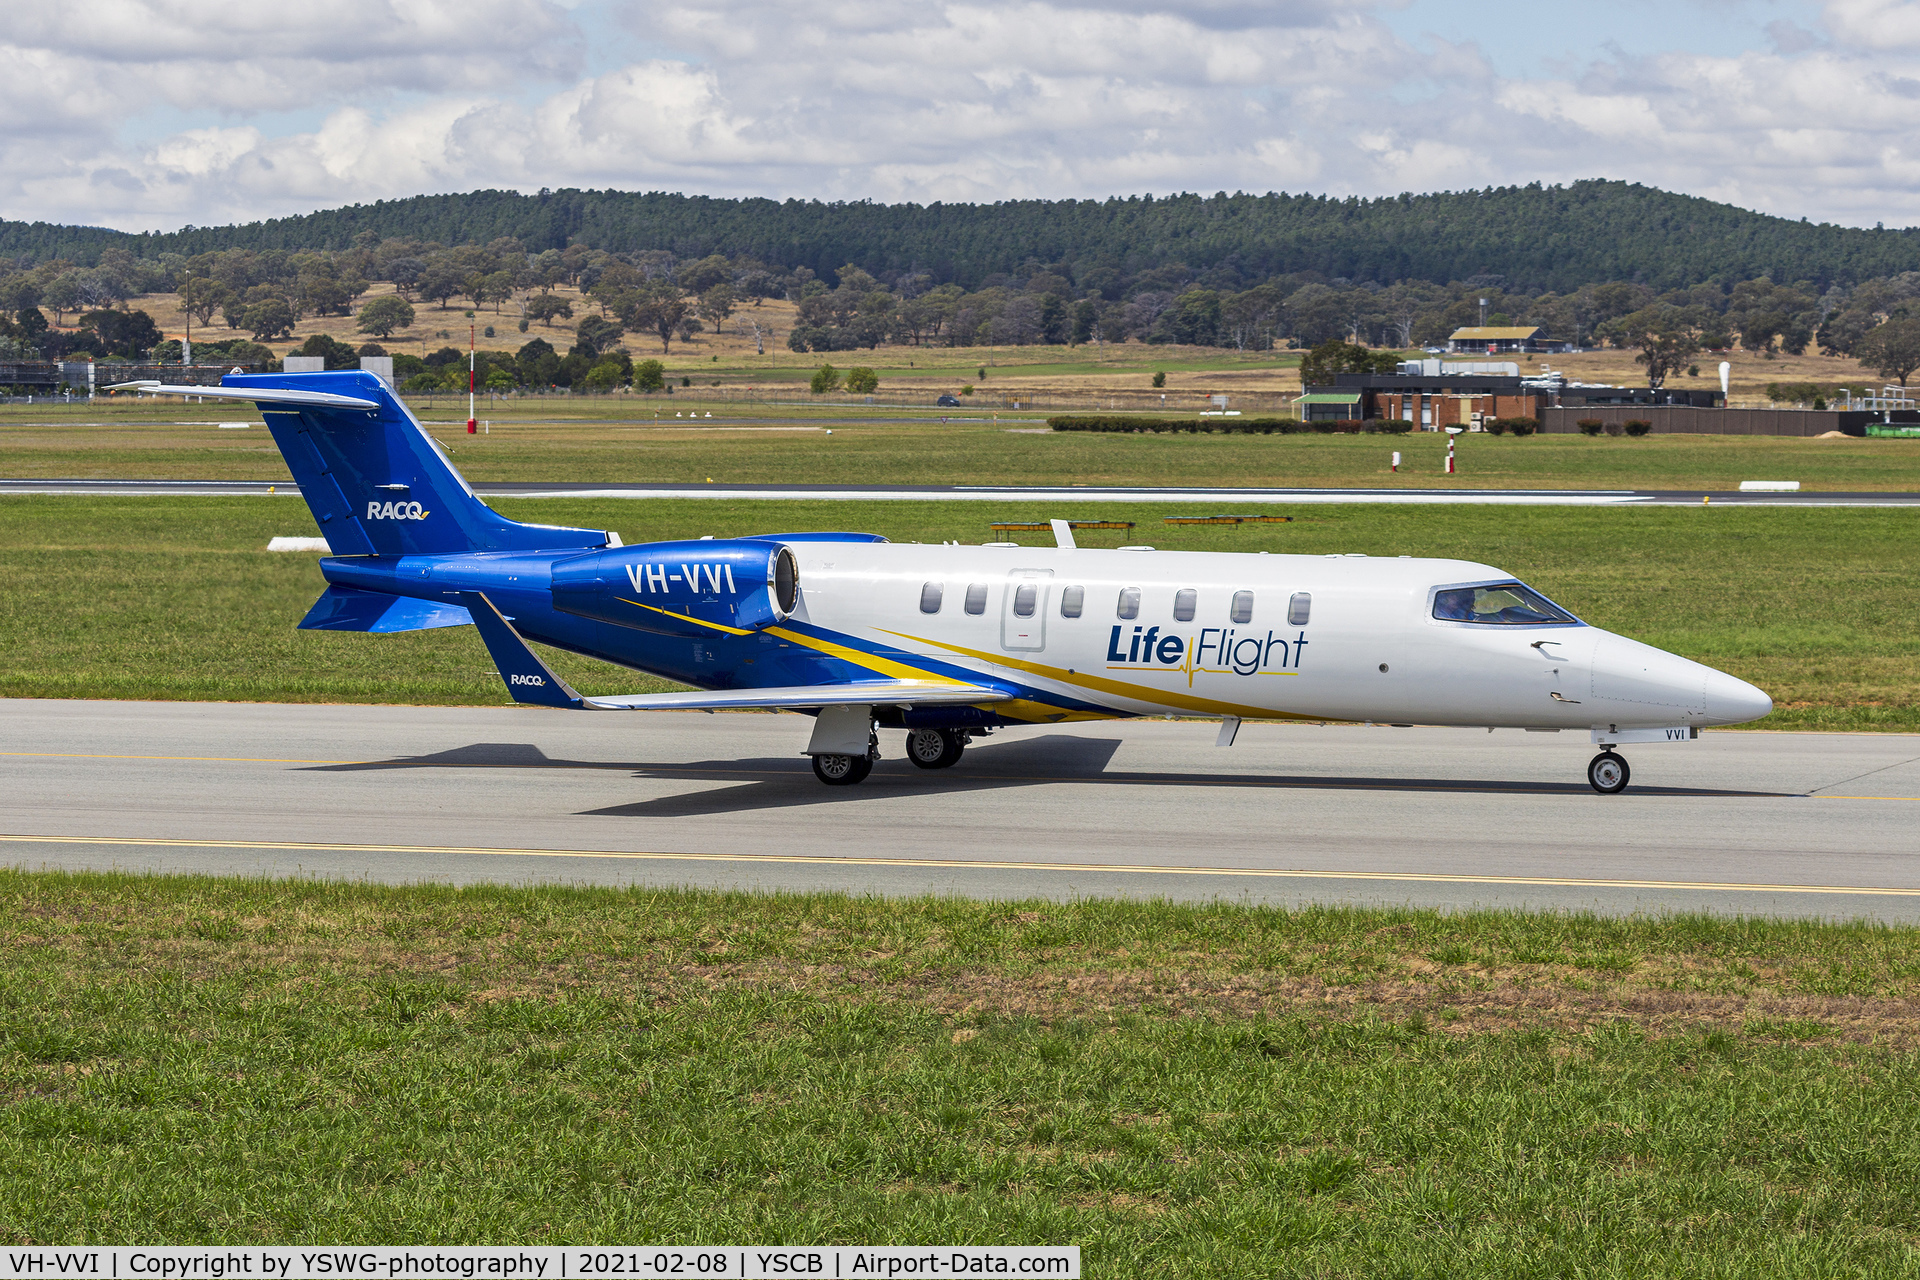 VH-VVI, 2004 Learjet 45 C/N 262, RACQ LifeFlight (VH-VVI) Learjet 45 taxiing at Canberra Airport.